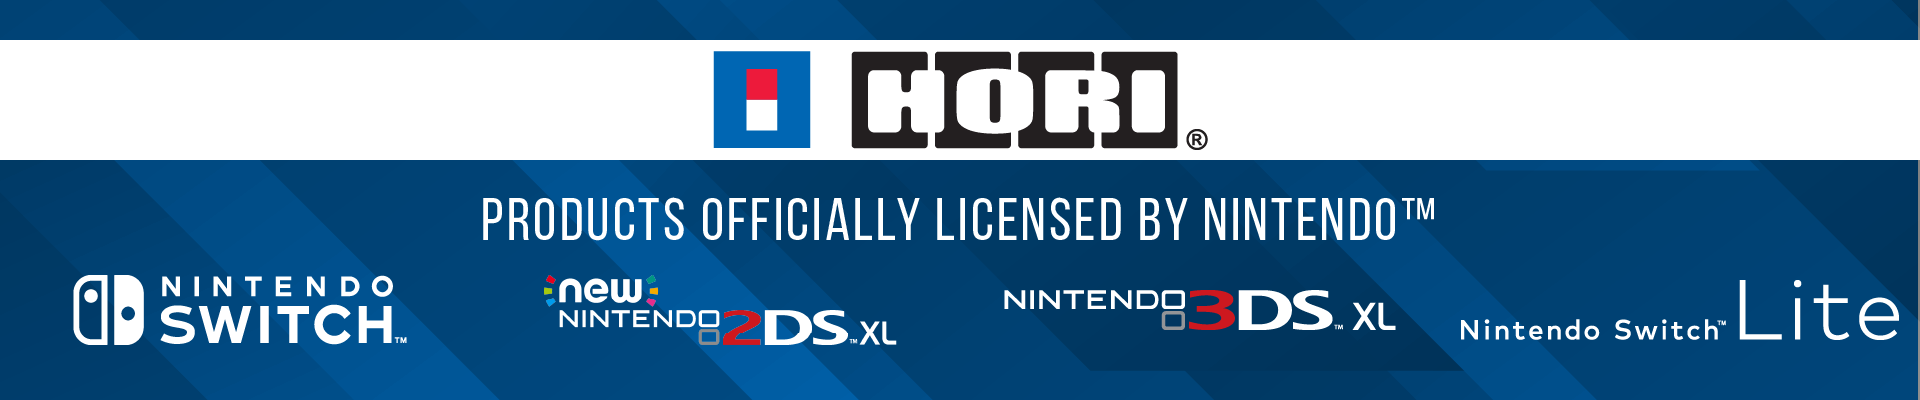 Hori Spotlight - Products Officially Licensed by Nintendo